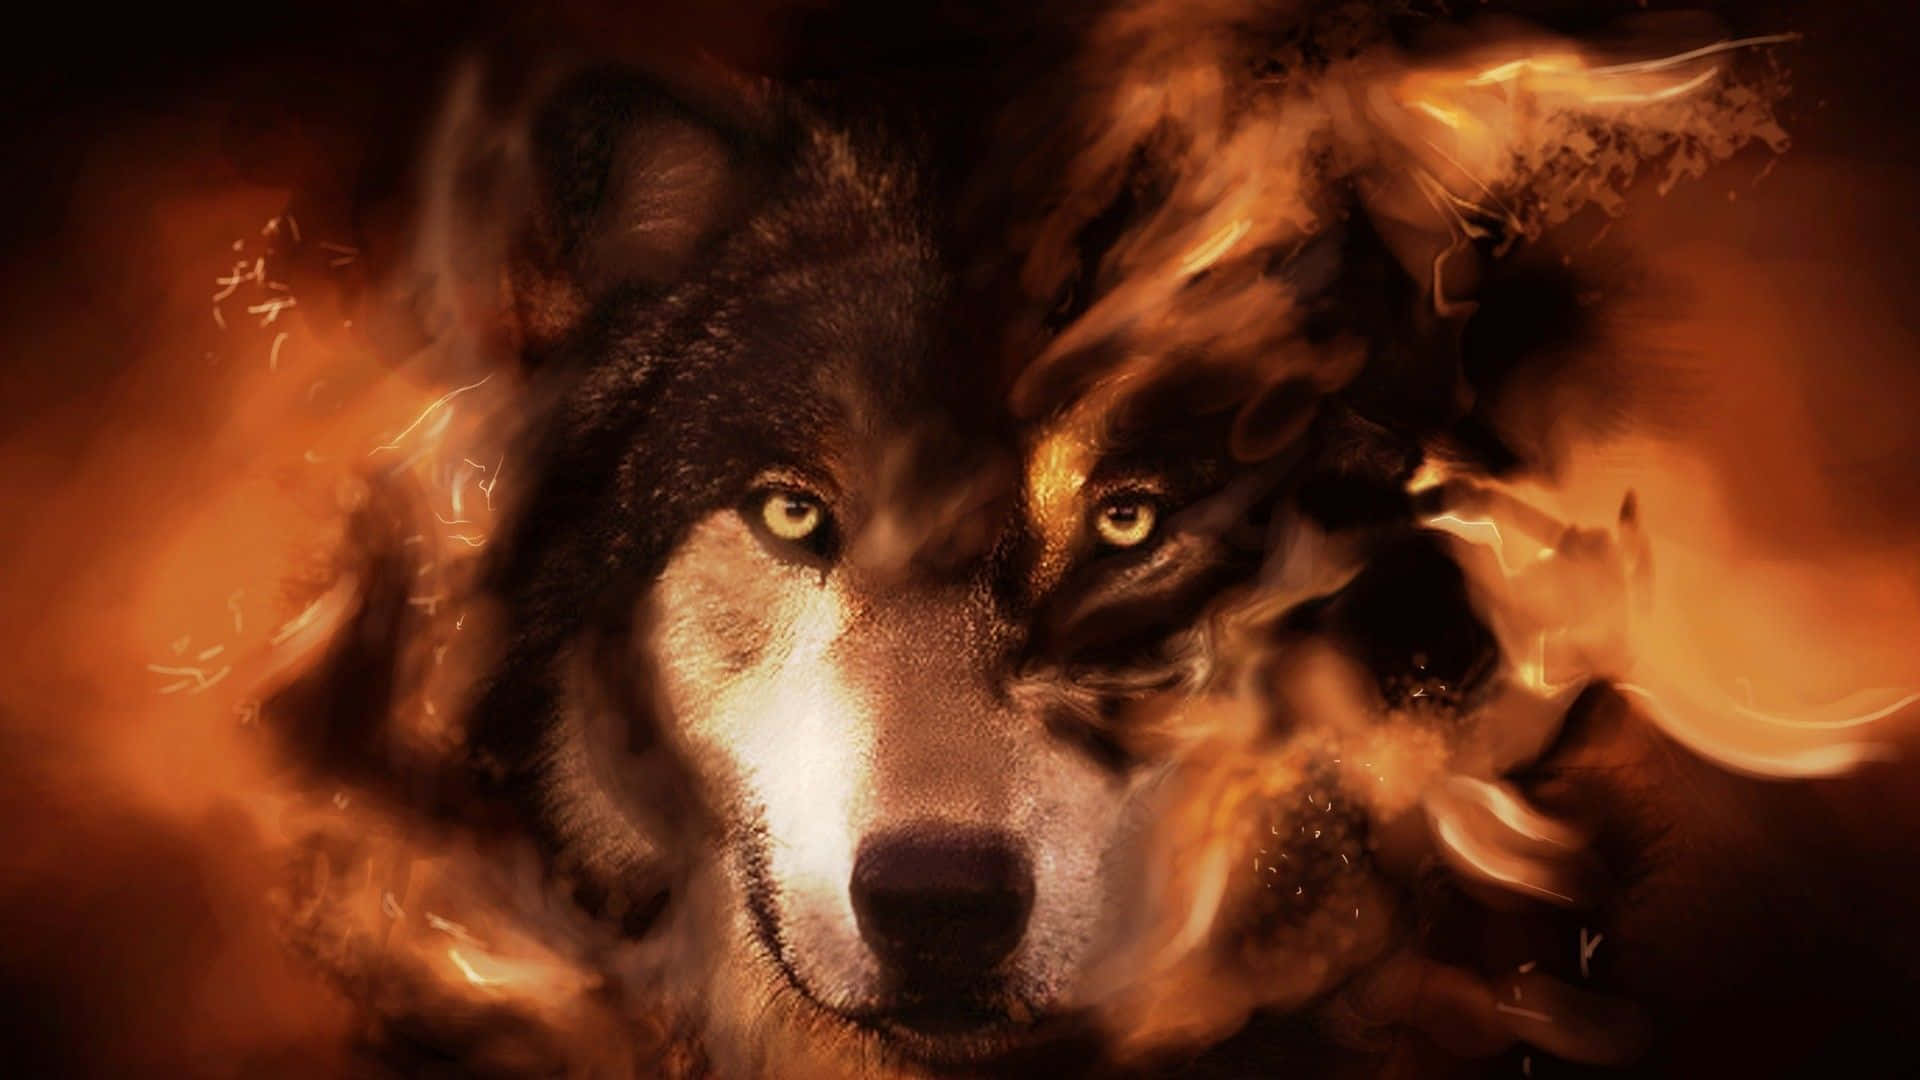 A majestic wolf standing atop a rocky outcropping, with a backdrop of flames and a river of water Wallpaper